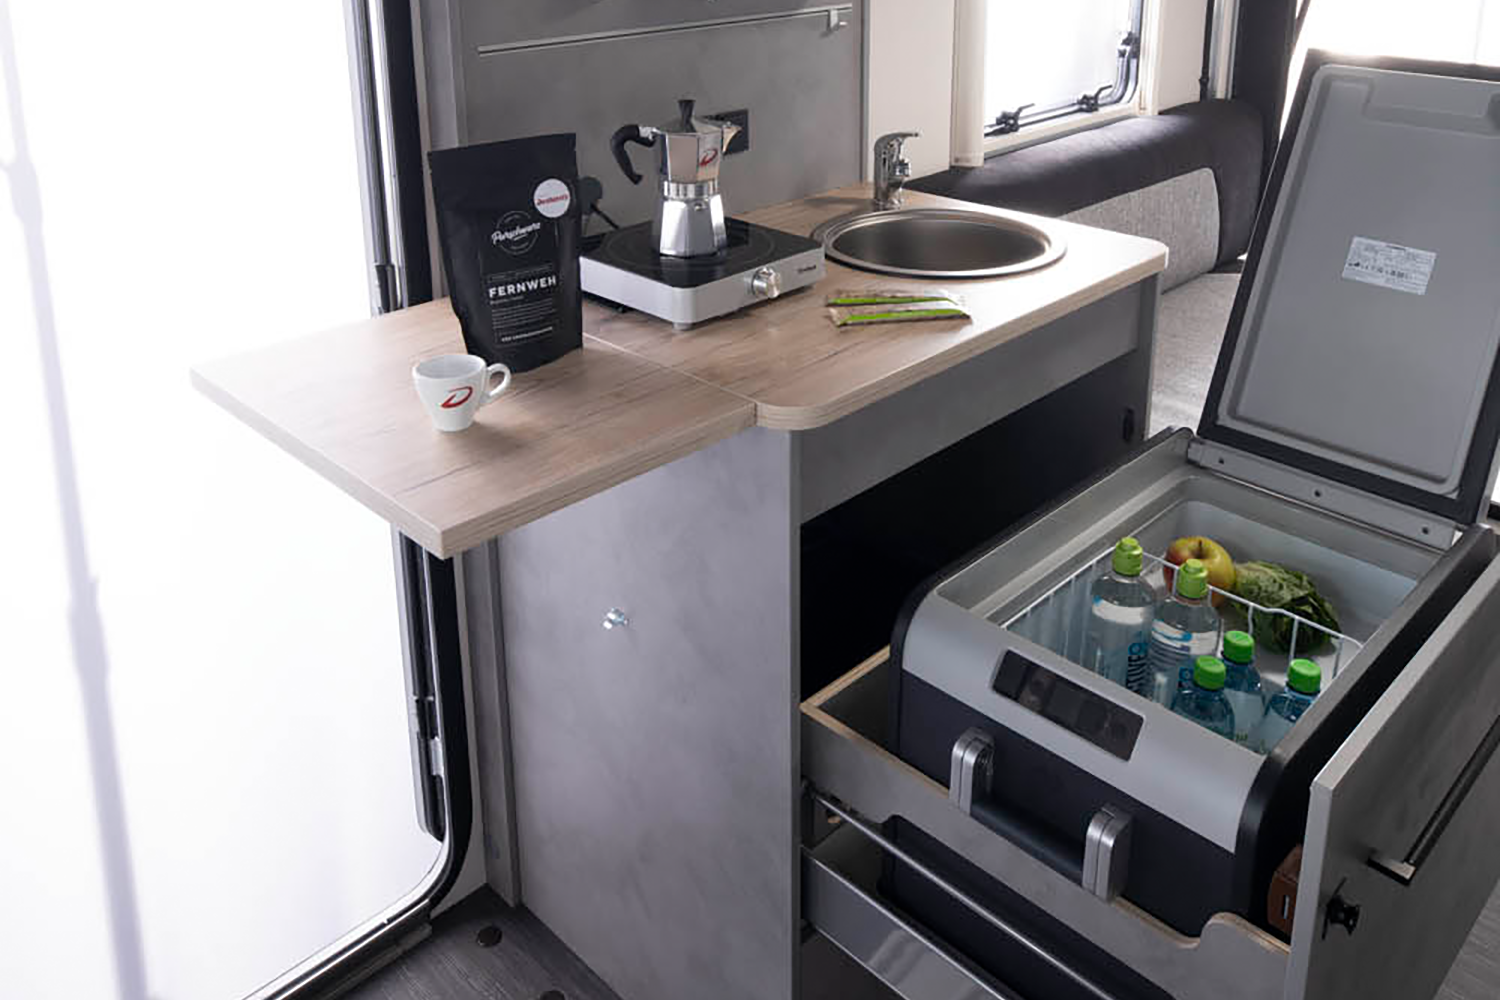 The compact kitchen unit with 10-litre fresh water and 10-litre waste water canisters, large kitchen worktop extension, induction hob and large drawer for the optional compressor cool box.